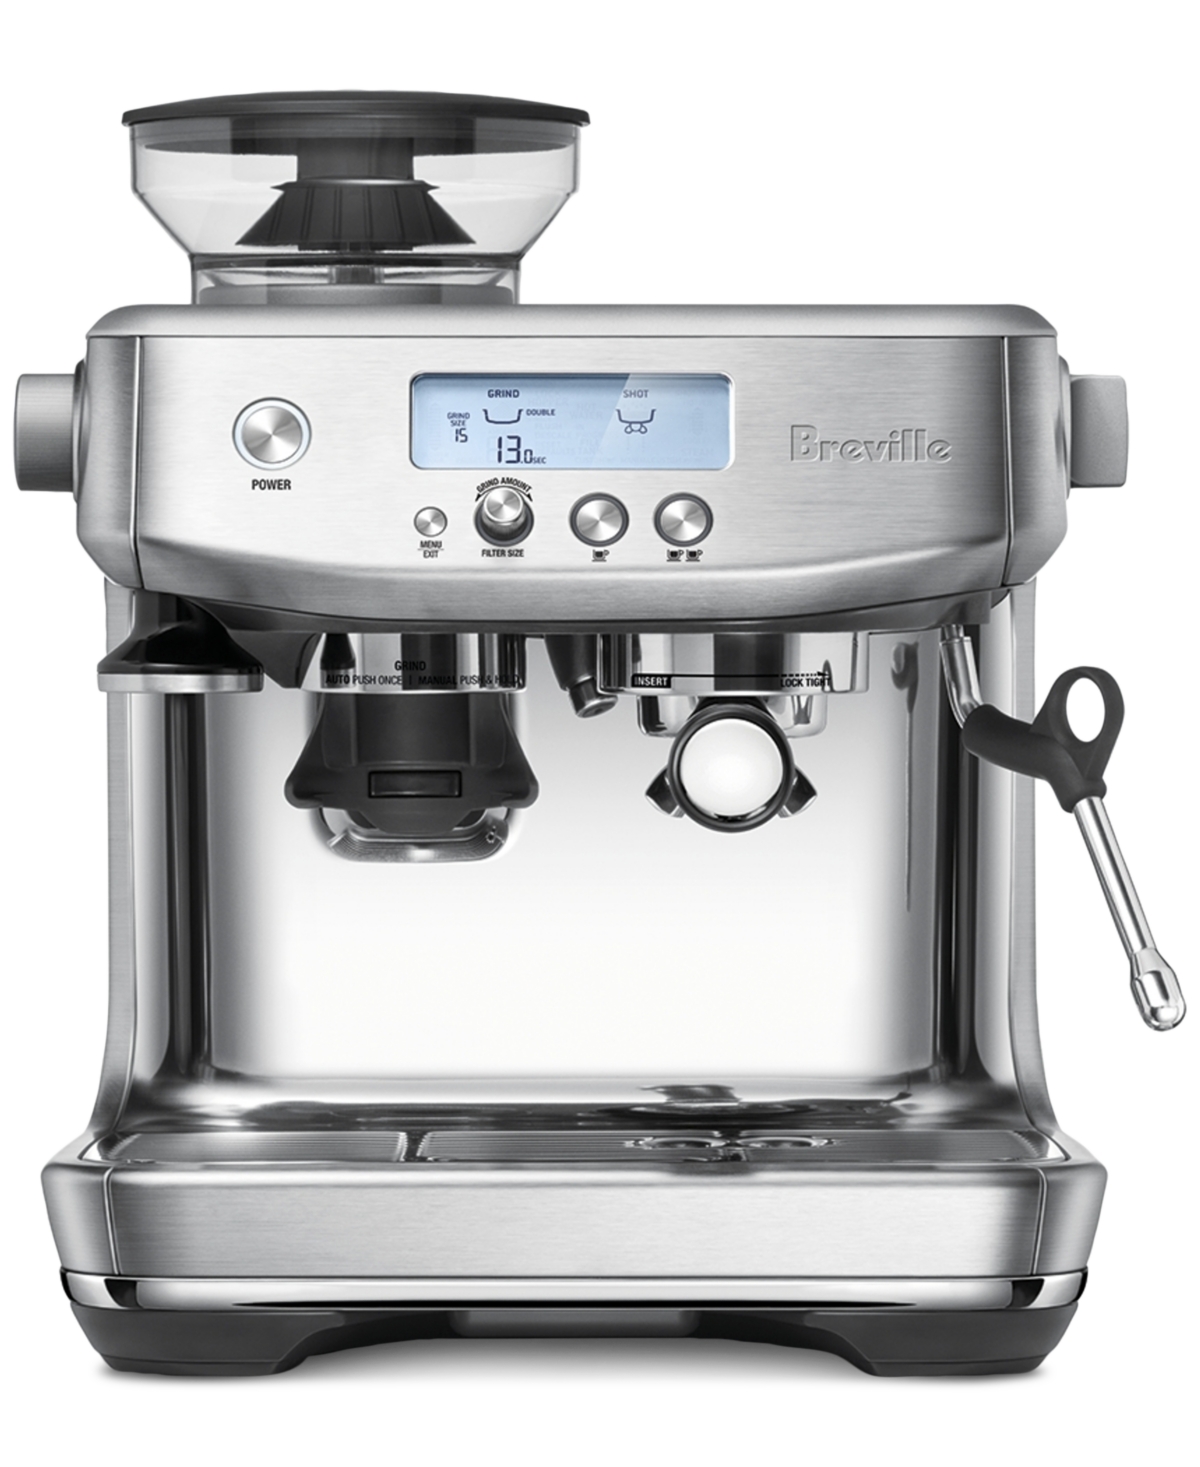 Breville Barista Pro Thermojet Grinder Espresso Maker In Brushed Stainless Steel